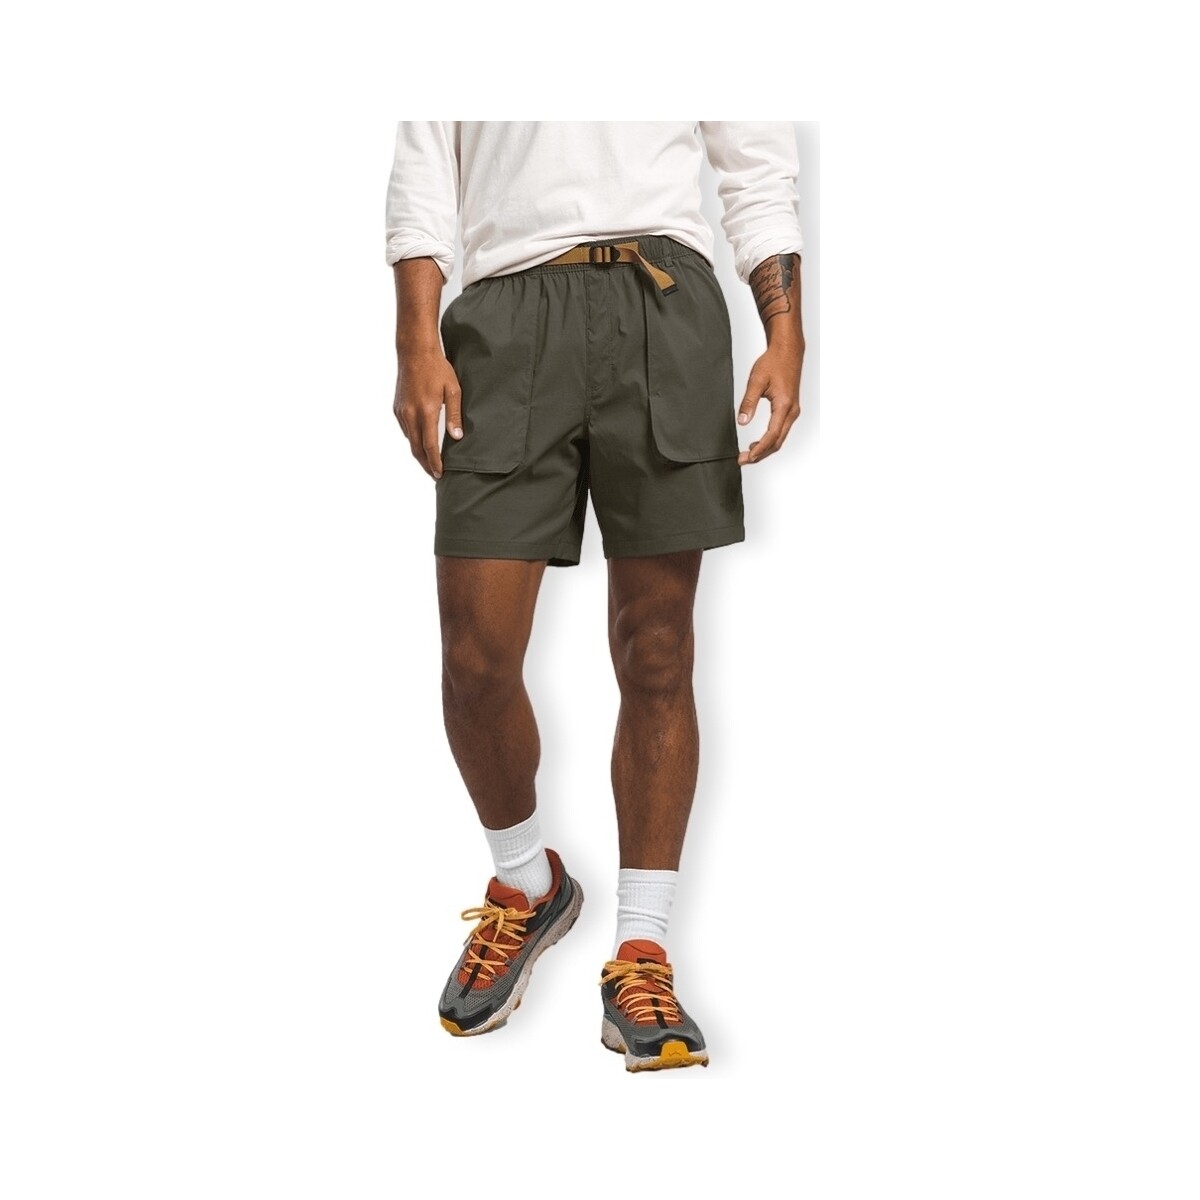 Vêtements Homme Shorts / Bermudas The North Face Class V Ripstop Shorts - New Taupe Green Vert